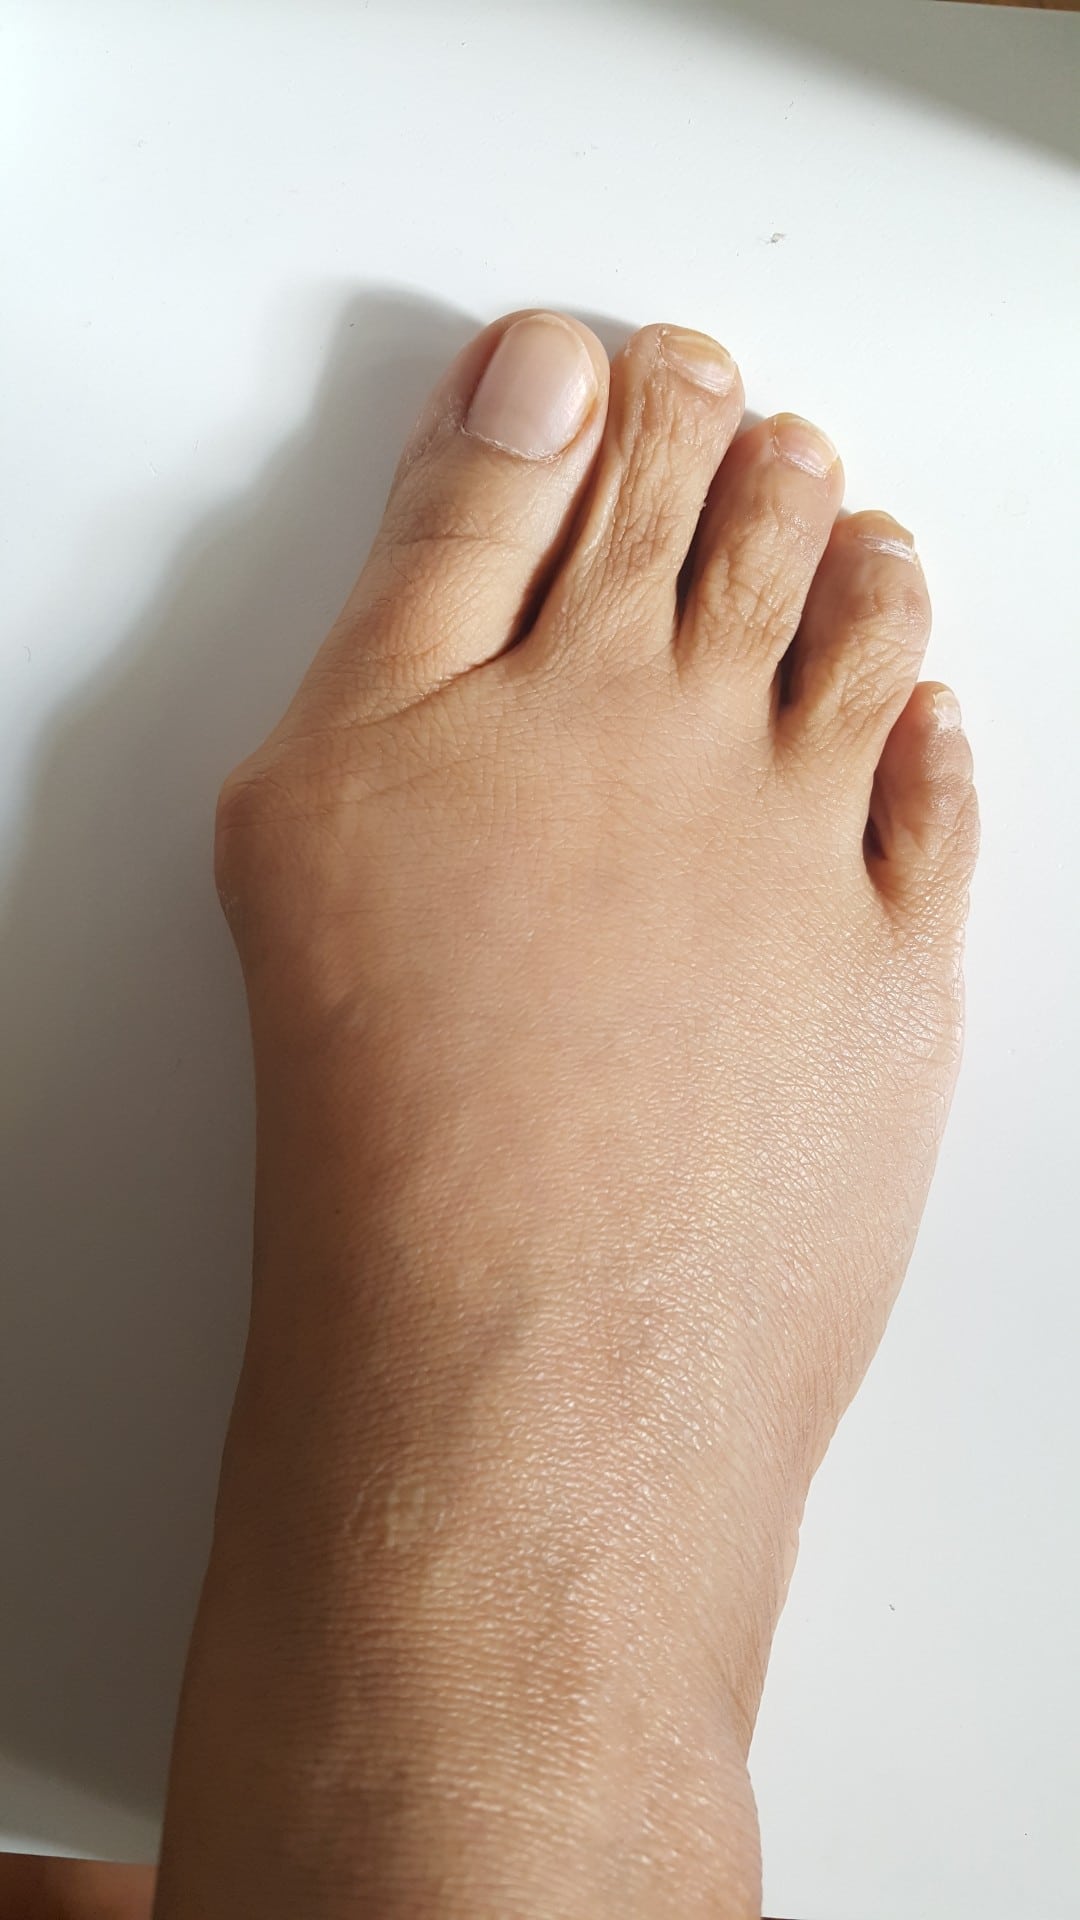 foot with bunion on white background